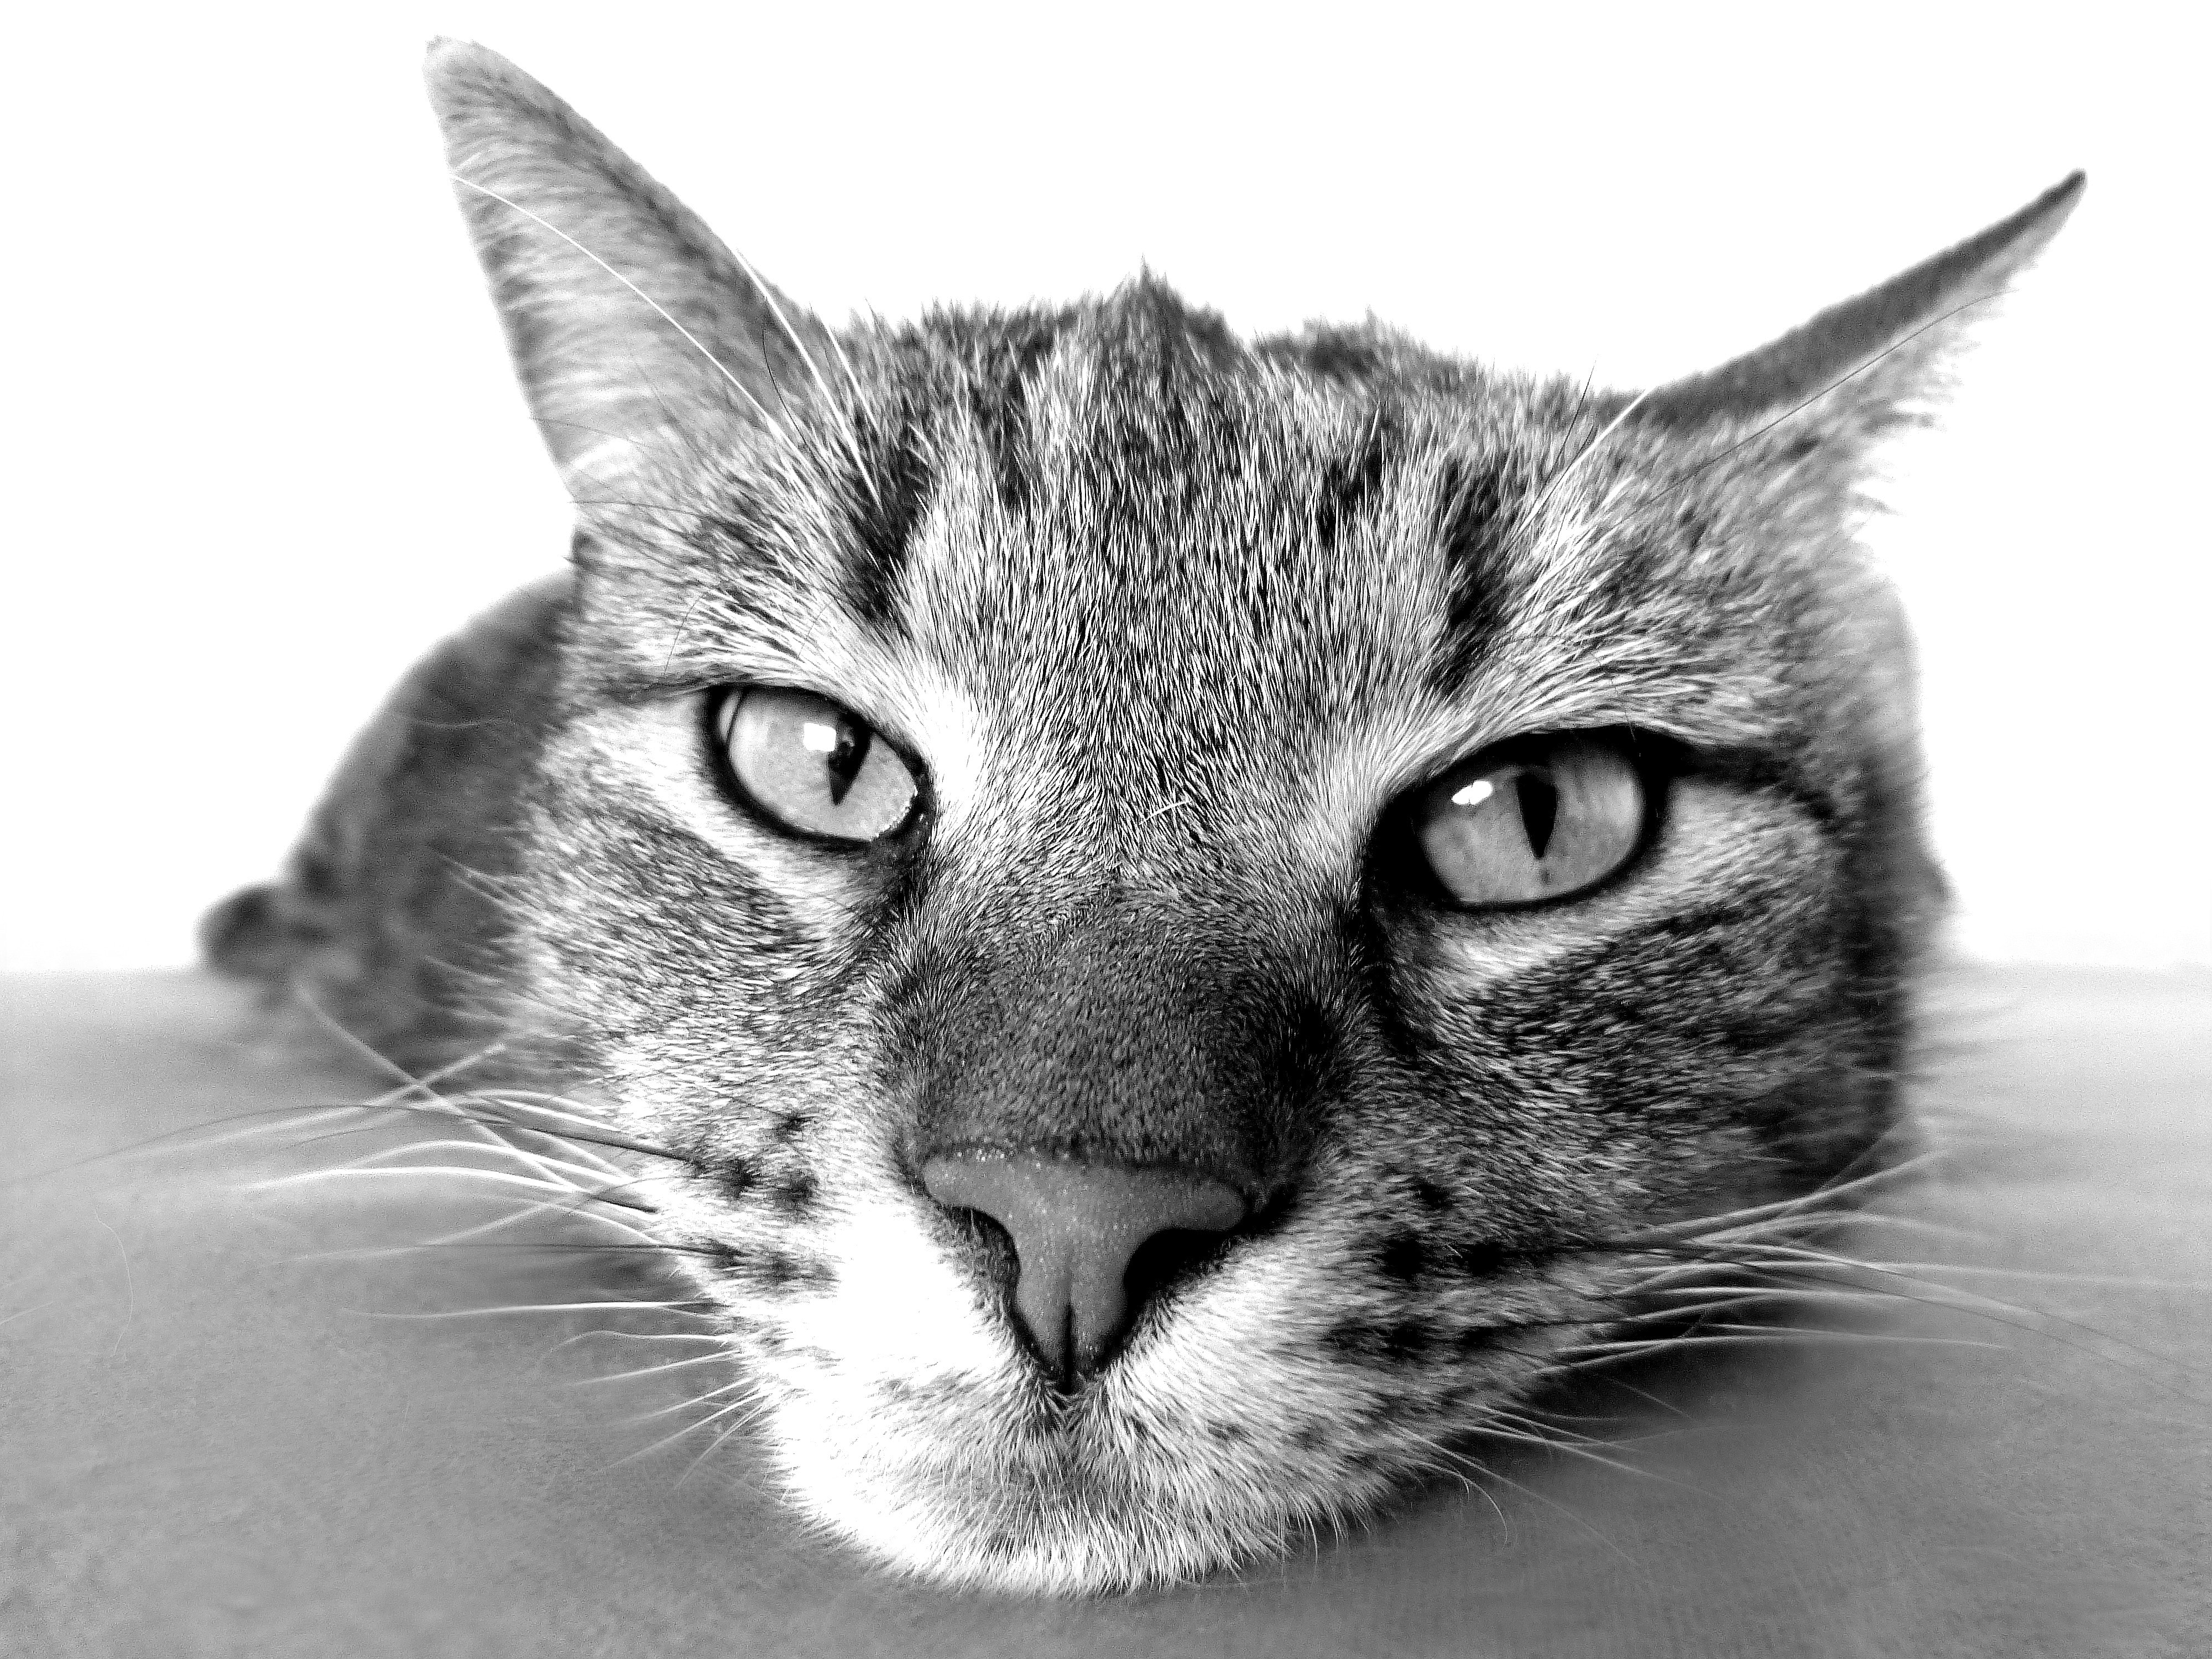 Grayscale Photography of Cat, Animal, Kitten, Tabby, Pet, HQ Photo